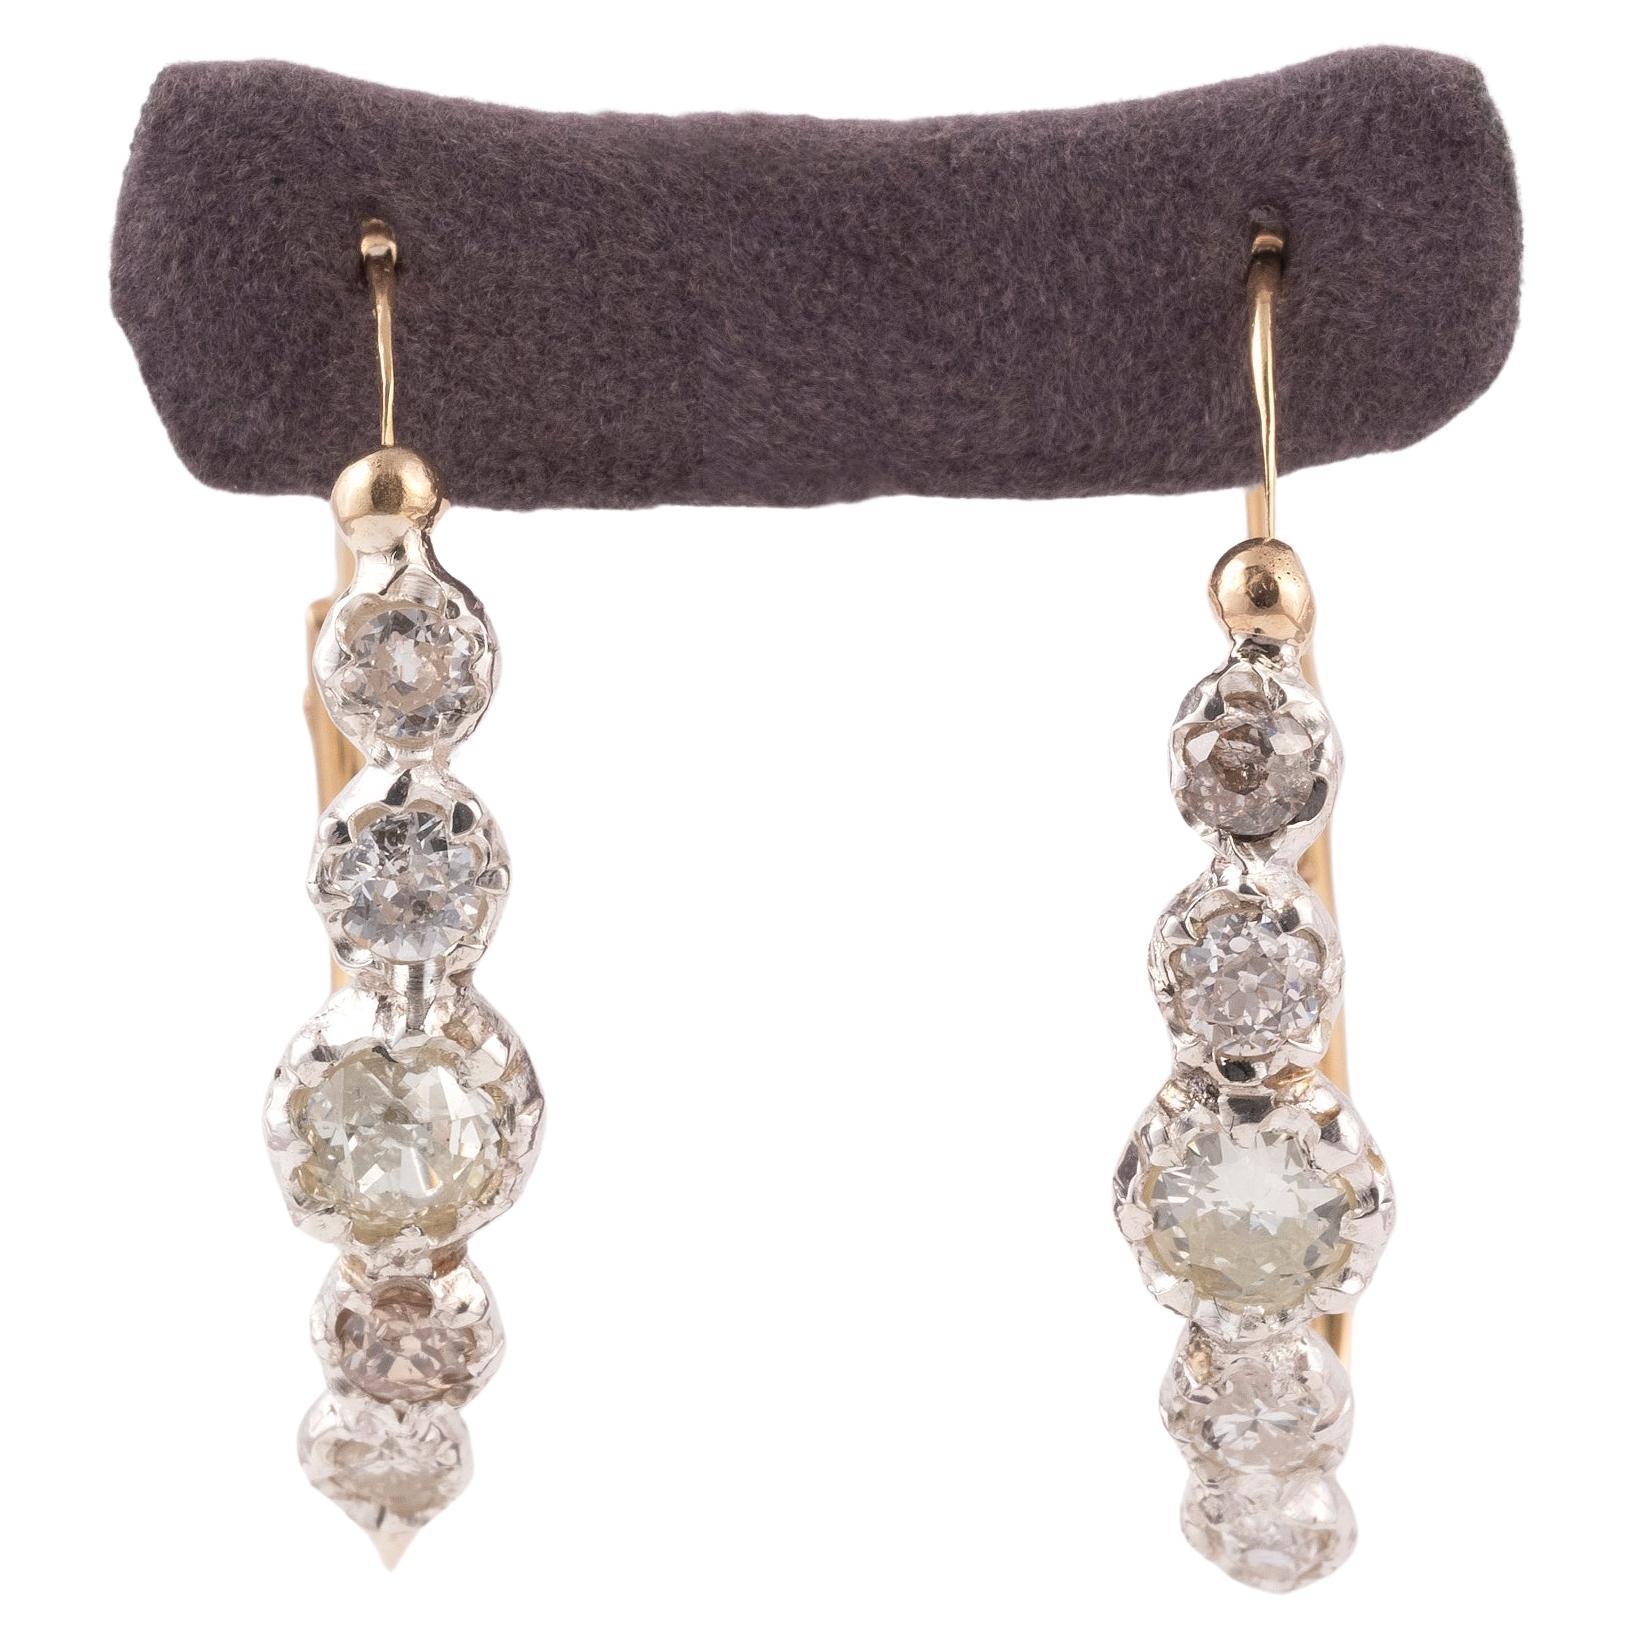 Poissarde earrings with old cut diamonds approximately 4ct in silver and gold. Typical back to front ear fittings of the poissarde style and wig loop. European in origin, circa 1830circa
Height: 3.5cm. Gross weight: 7.9 g.